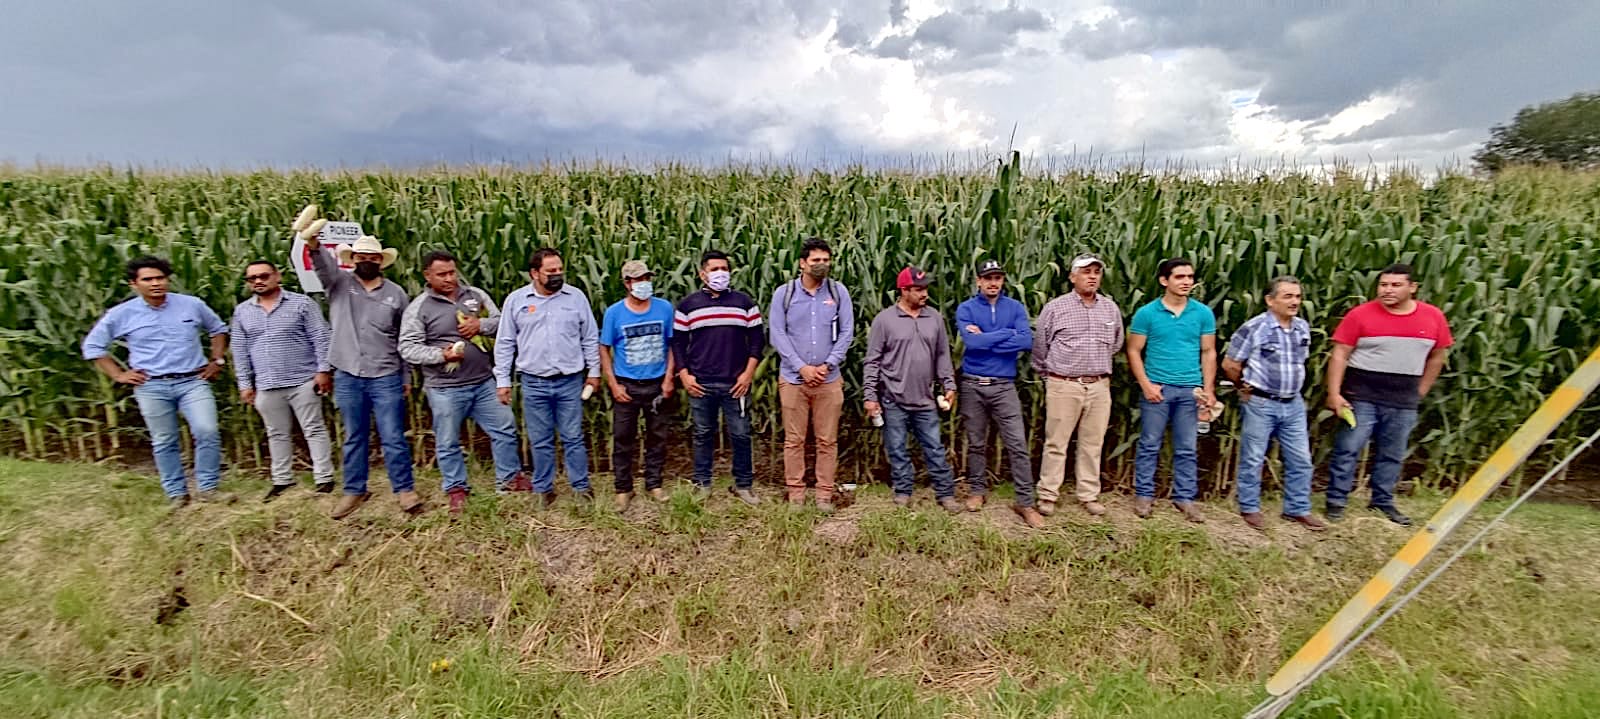 Planning meeting and field day with farmers who want to participate in the Agriba Sustentable project, in El Greco, Pénjamo, in Mexico’s Guanajuato state. (Photo: CIMMYT)